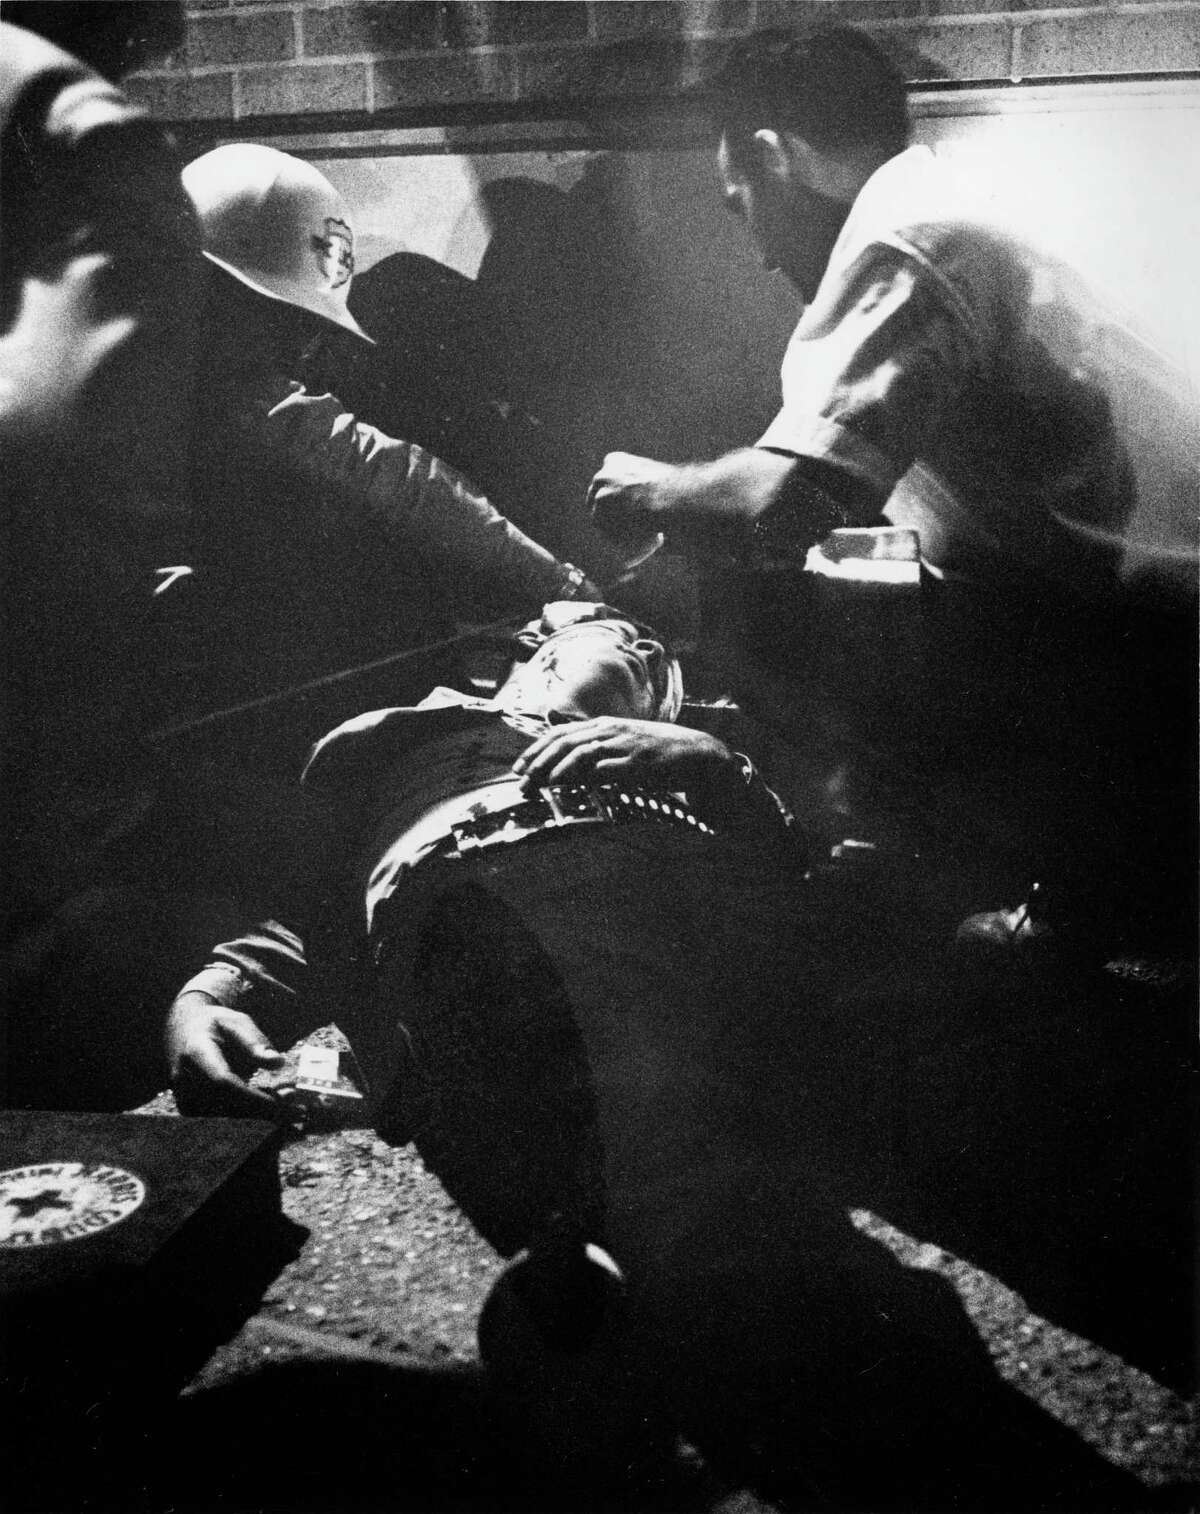 Houston Police officer Louis Kuba seconds after he was shot. The rookie officer died from a wound in the forehead as he prepared to charge with other officers a dormitory at TSU.